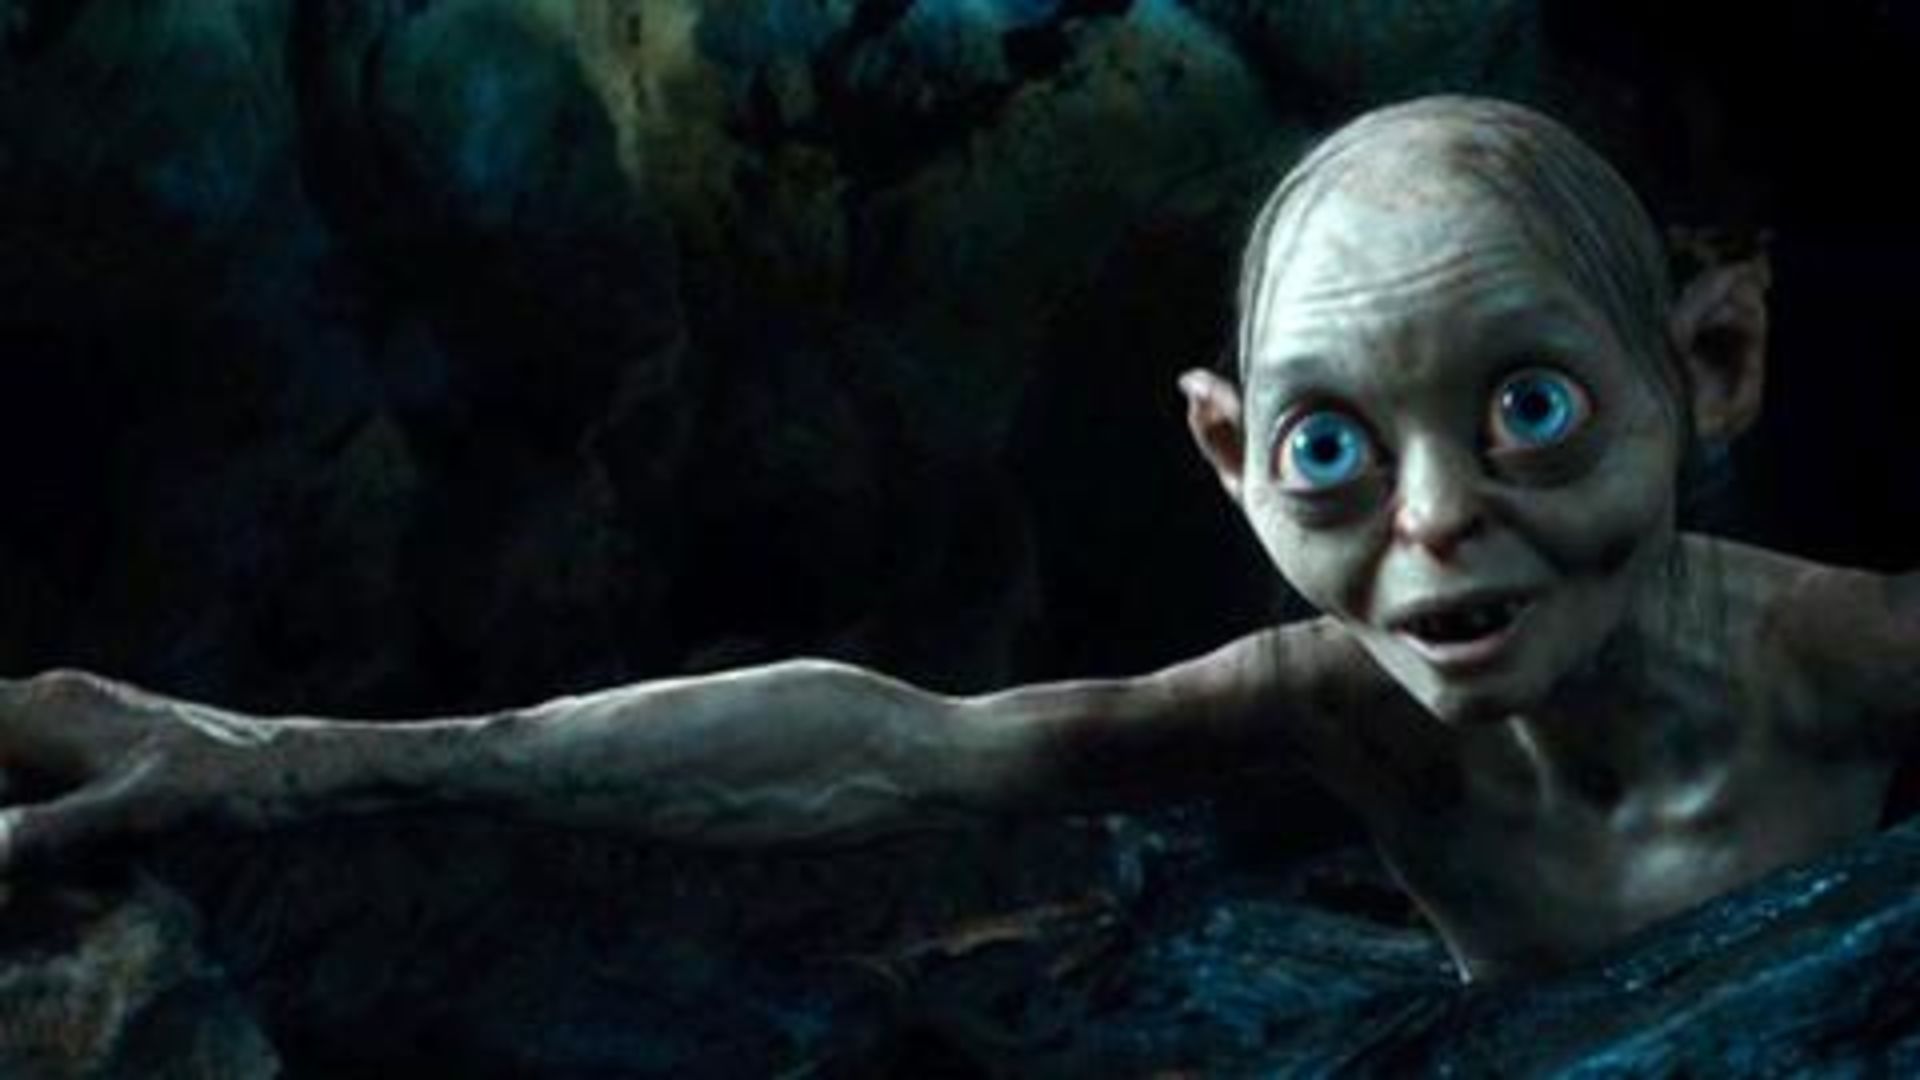 Watch Gollum Mo-Cap More Advanced in 'The Hobbit' | WIRED